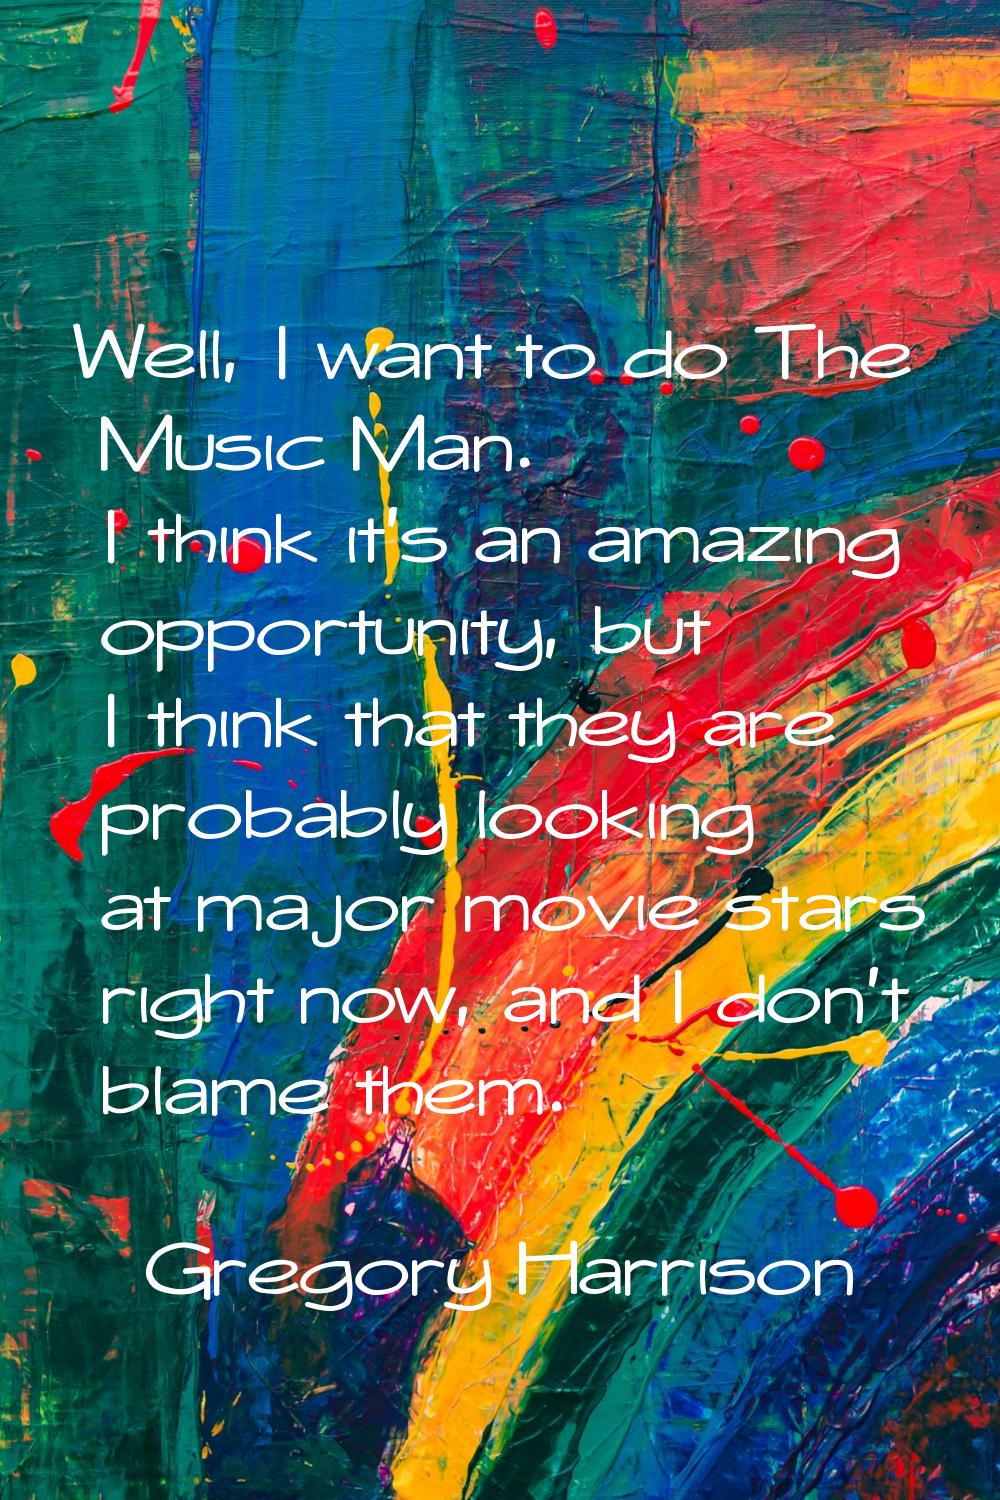 Well, I want to do The Music Man. I think it's an amazing opportunity, but I think that they are pr